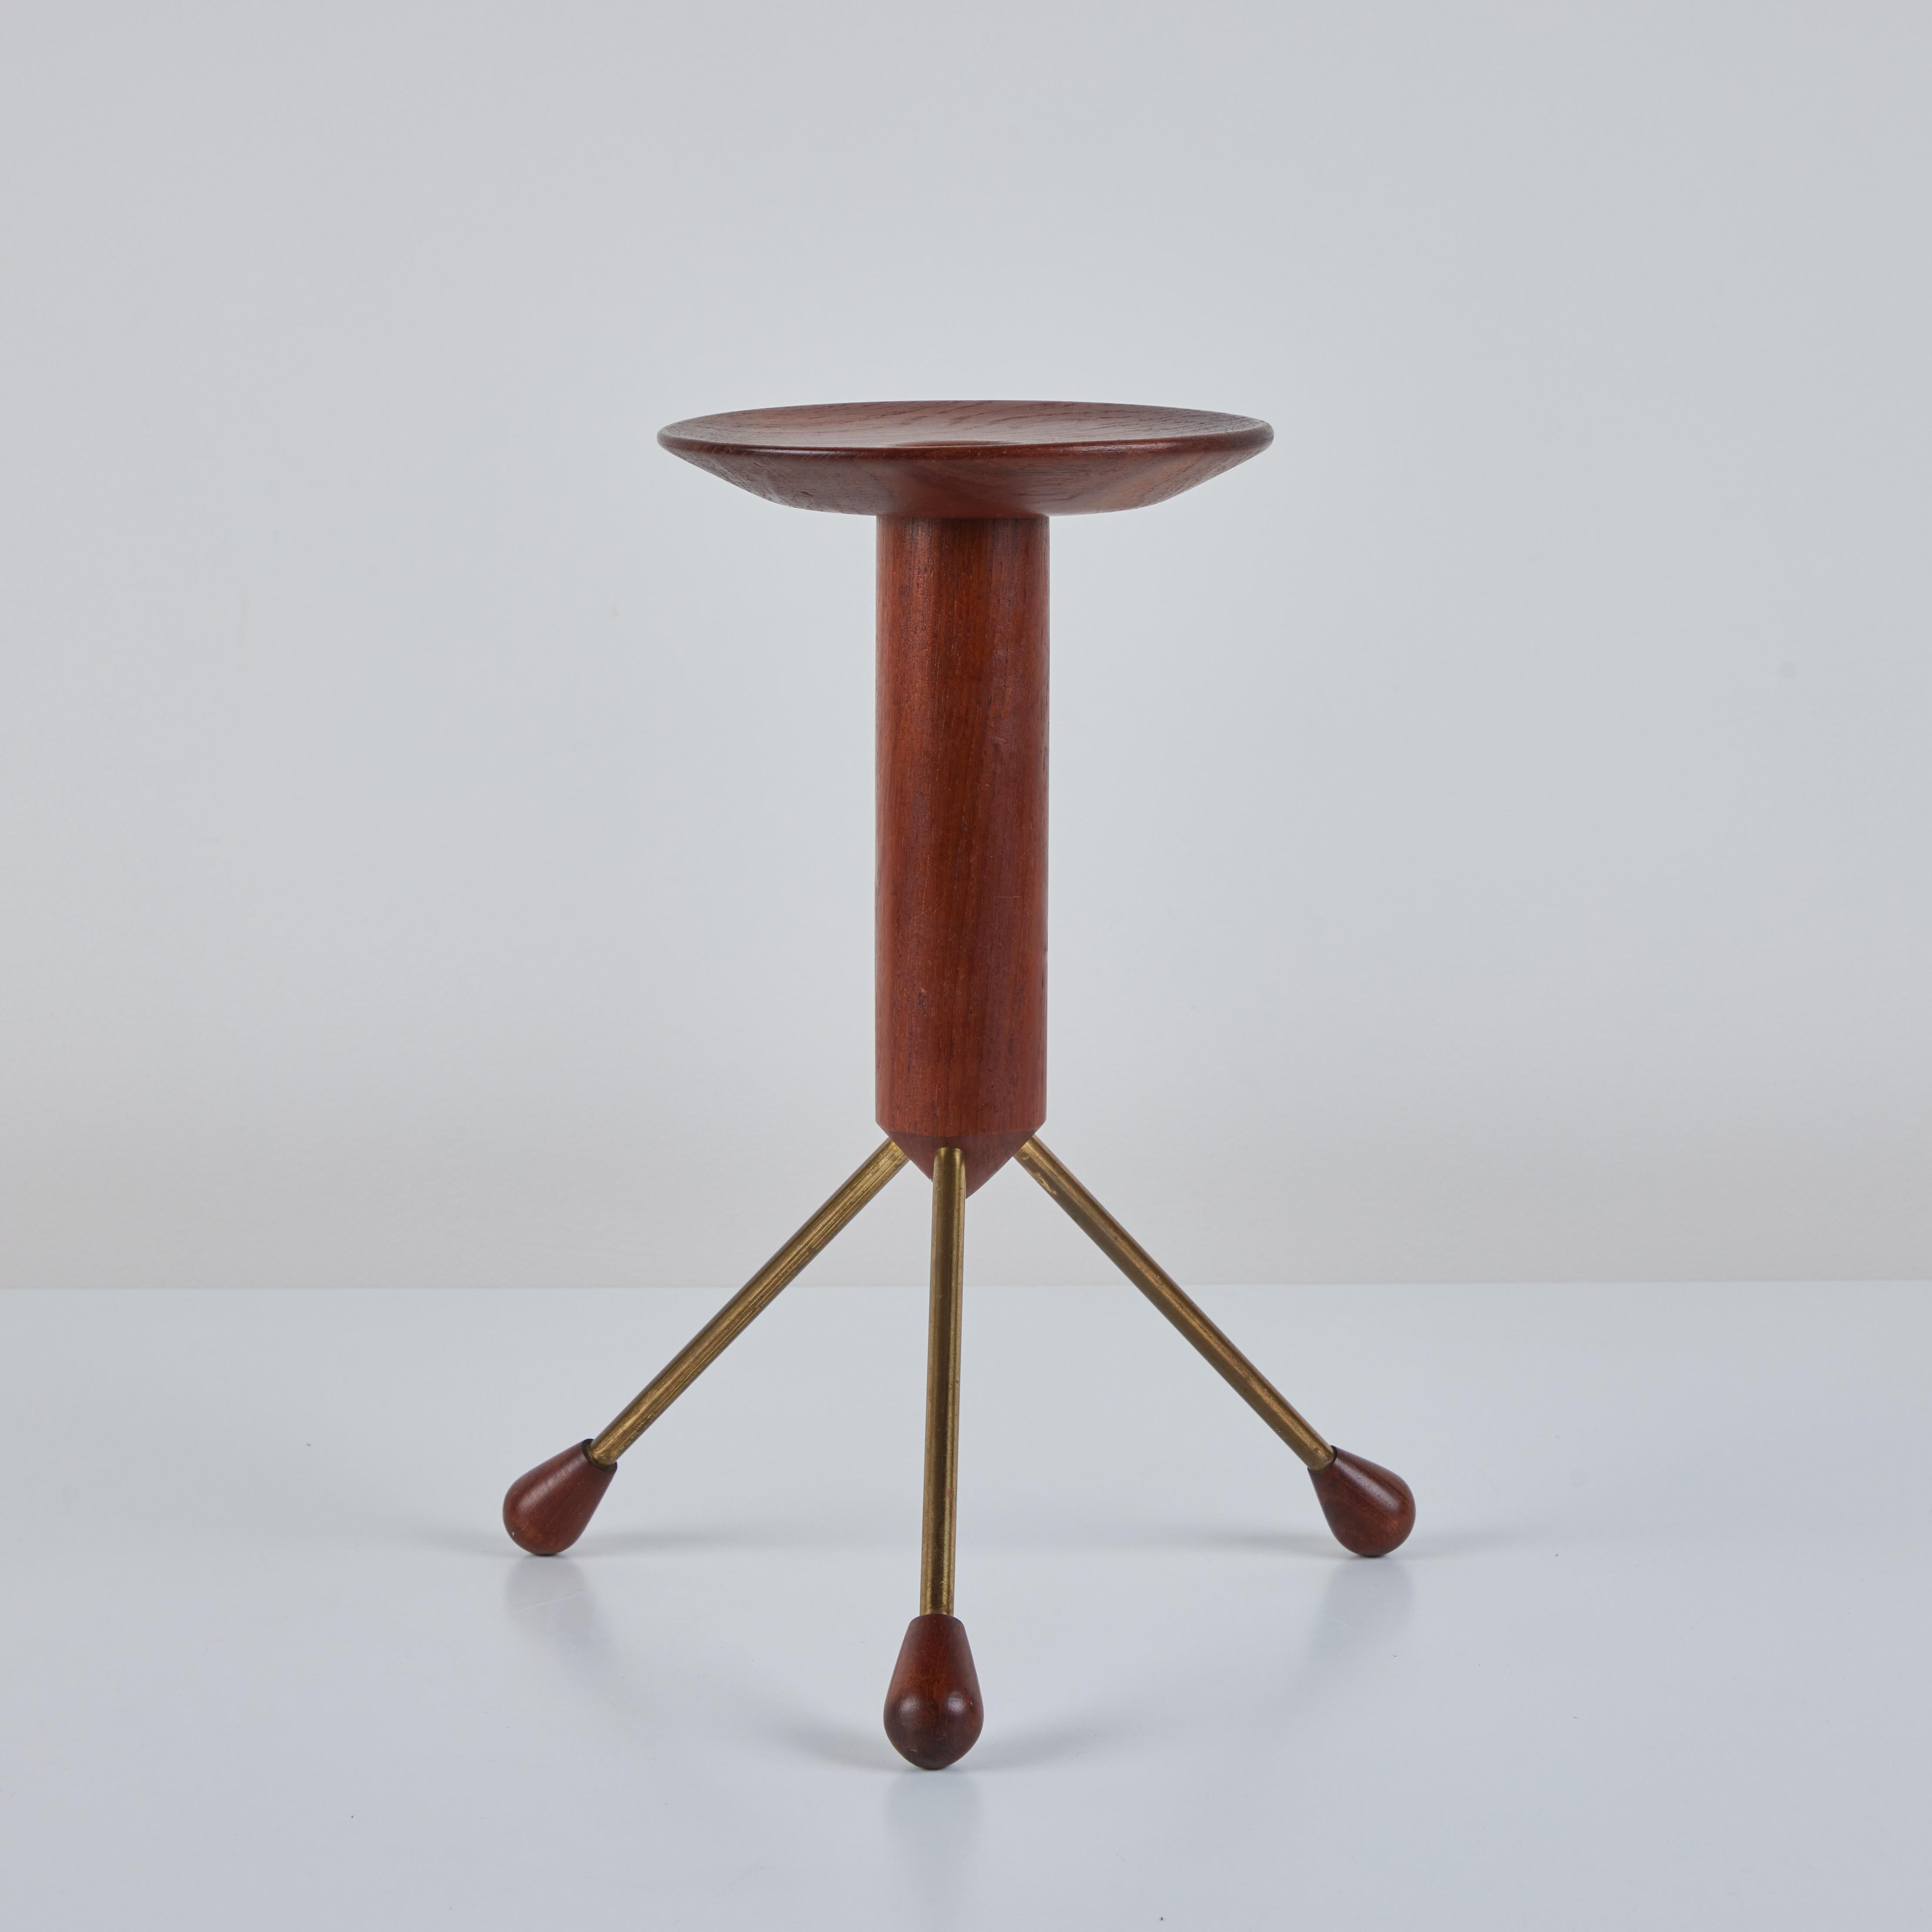 20th Century Teak and Brass Side Table by Albert Larsson for Alberts Tibro